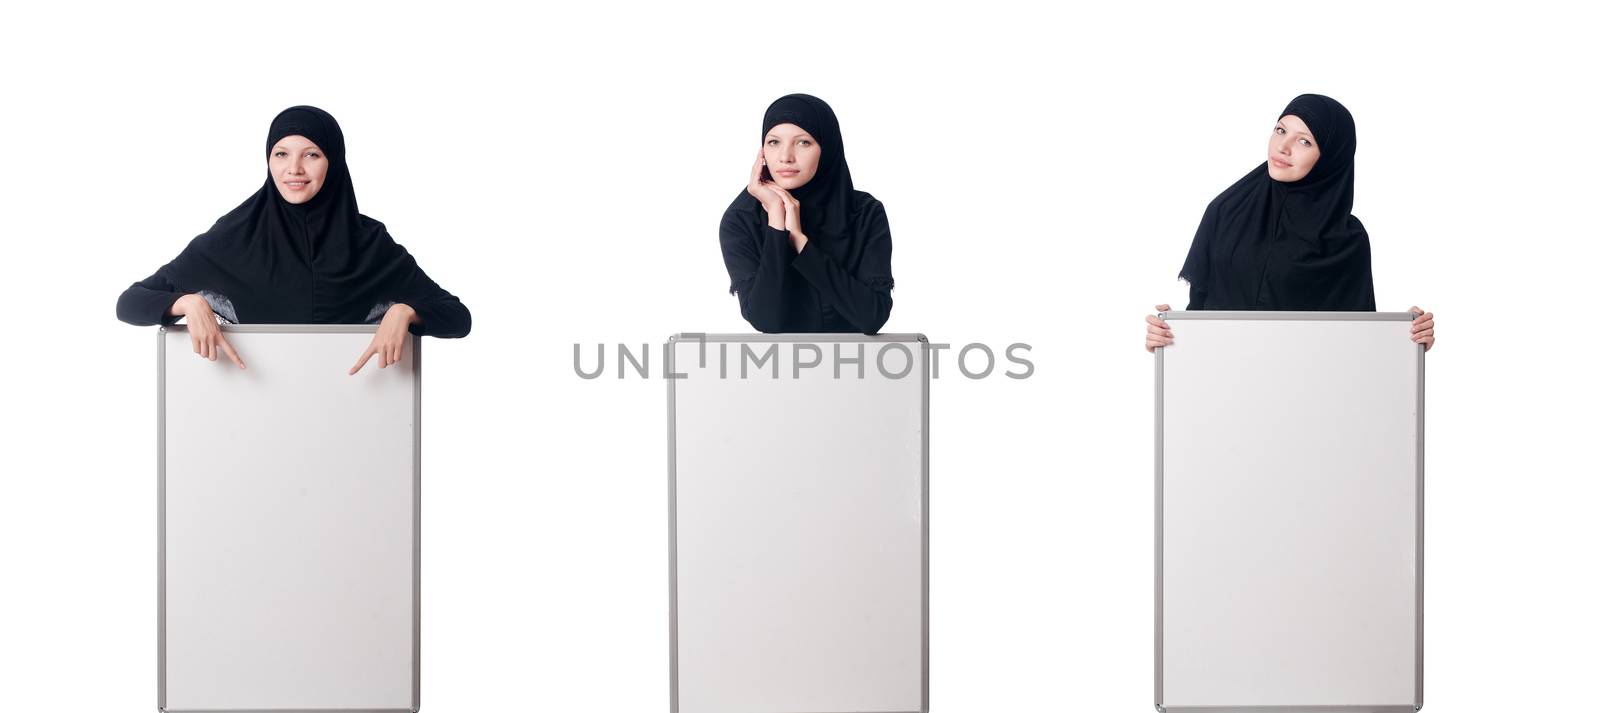 Muslim woman with blank board on white by Elnur